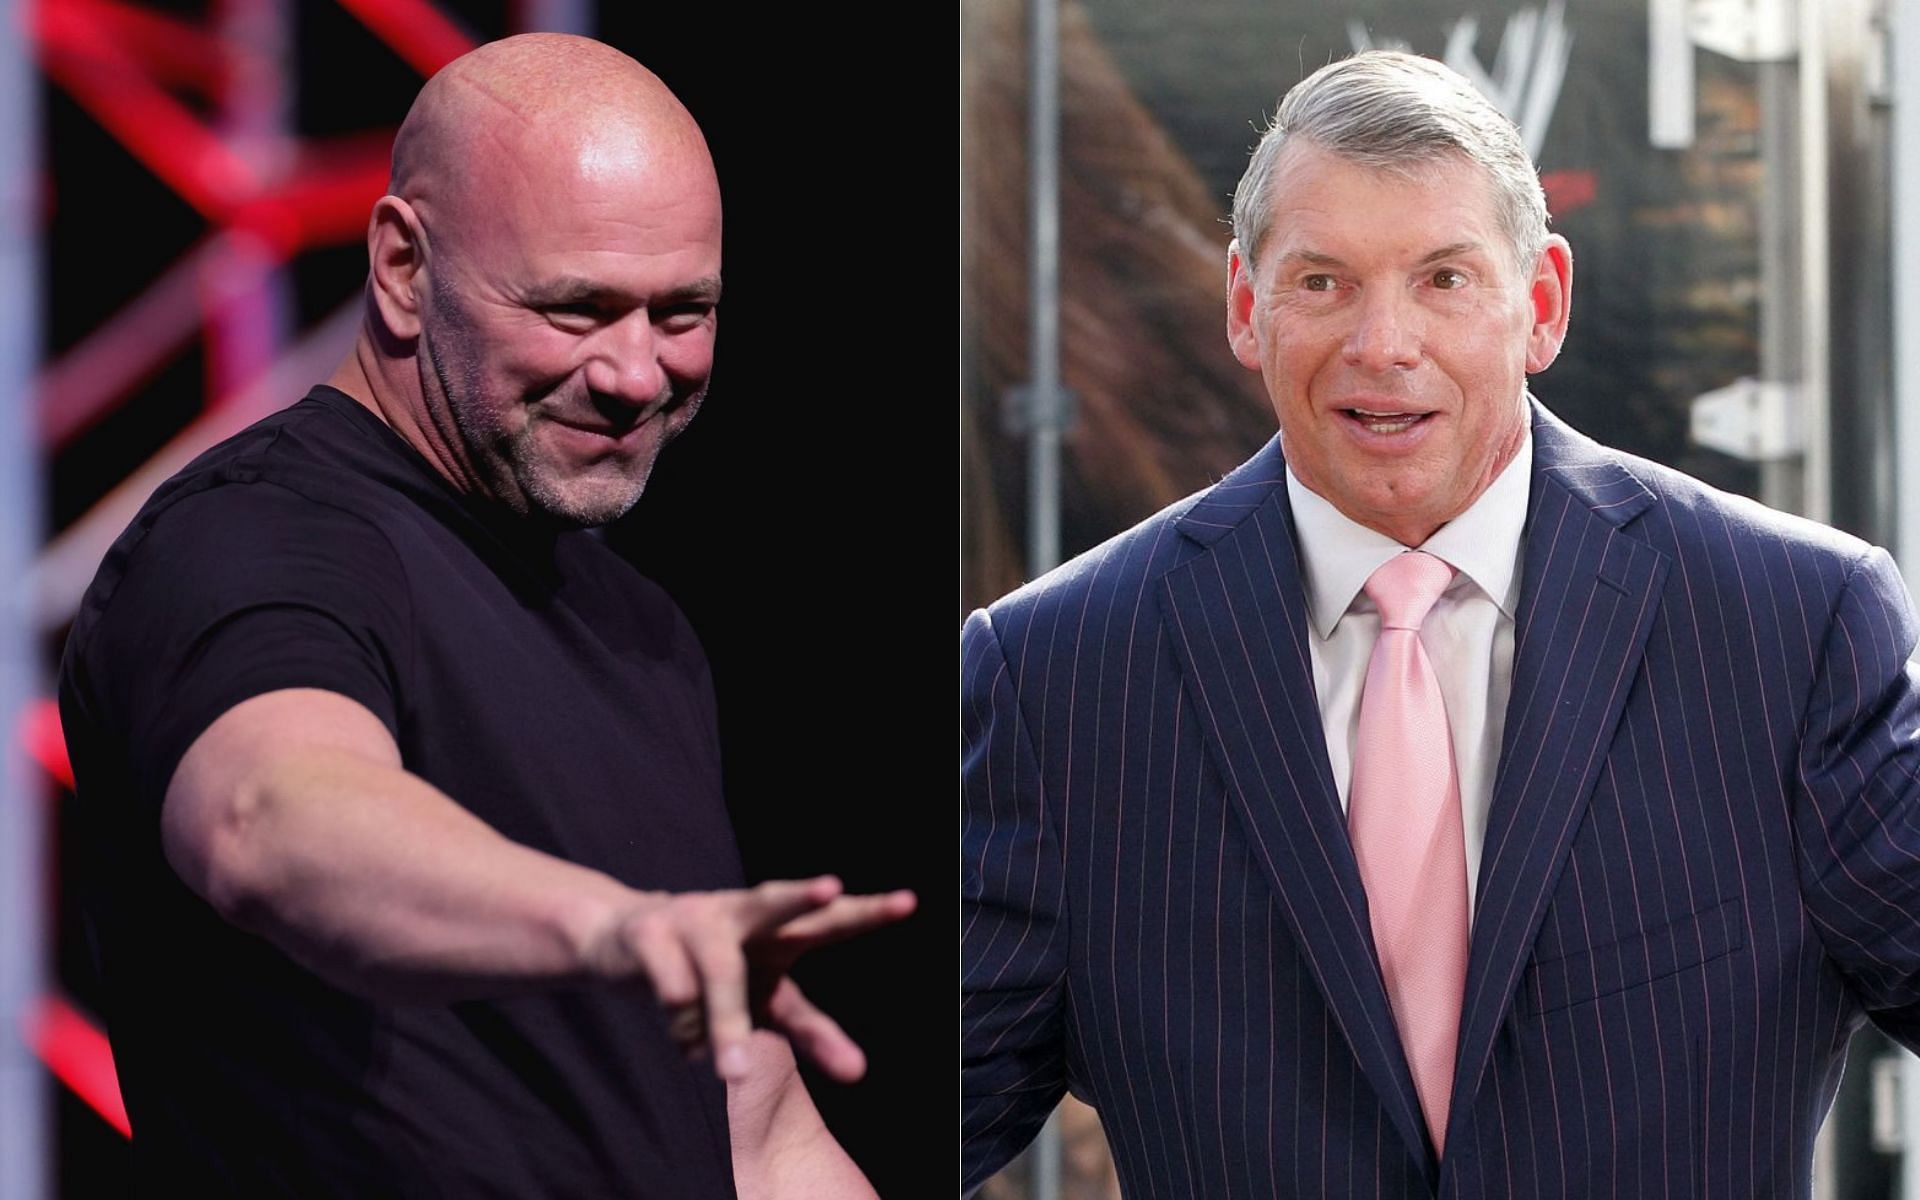 Dana White (left) and Vince McMahon (right) [Image Source: Getty]